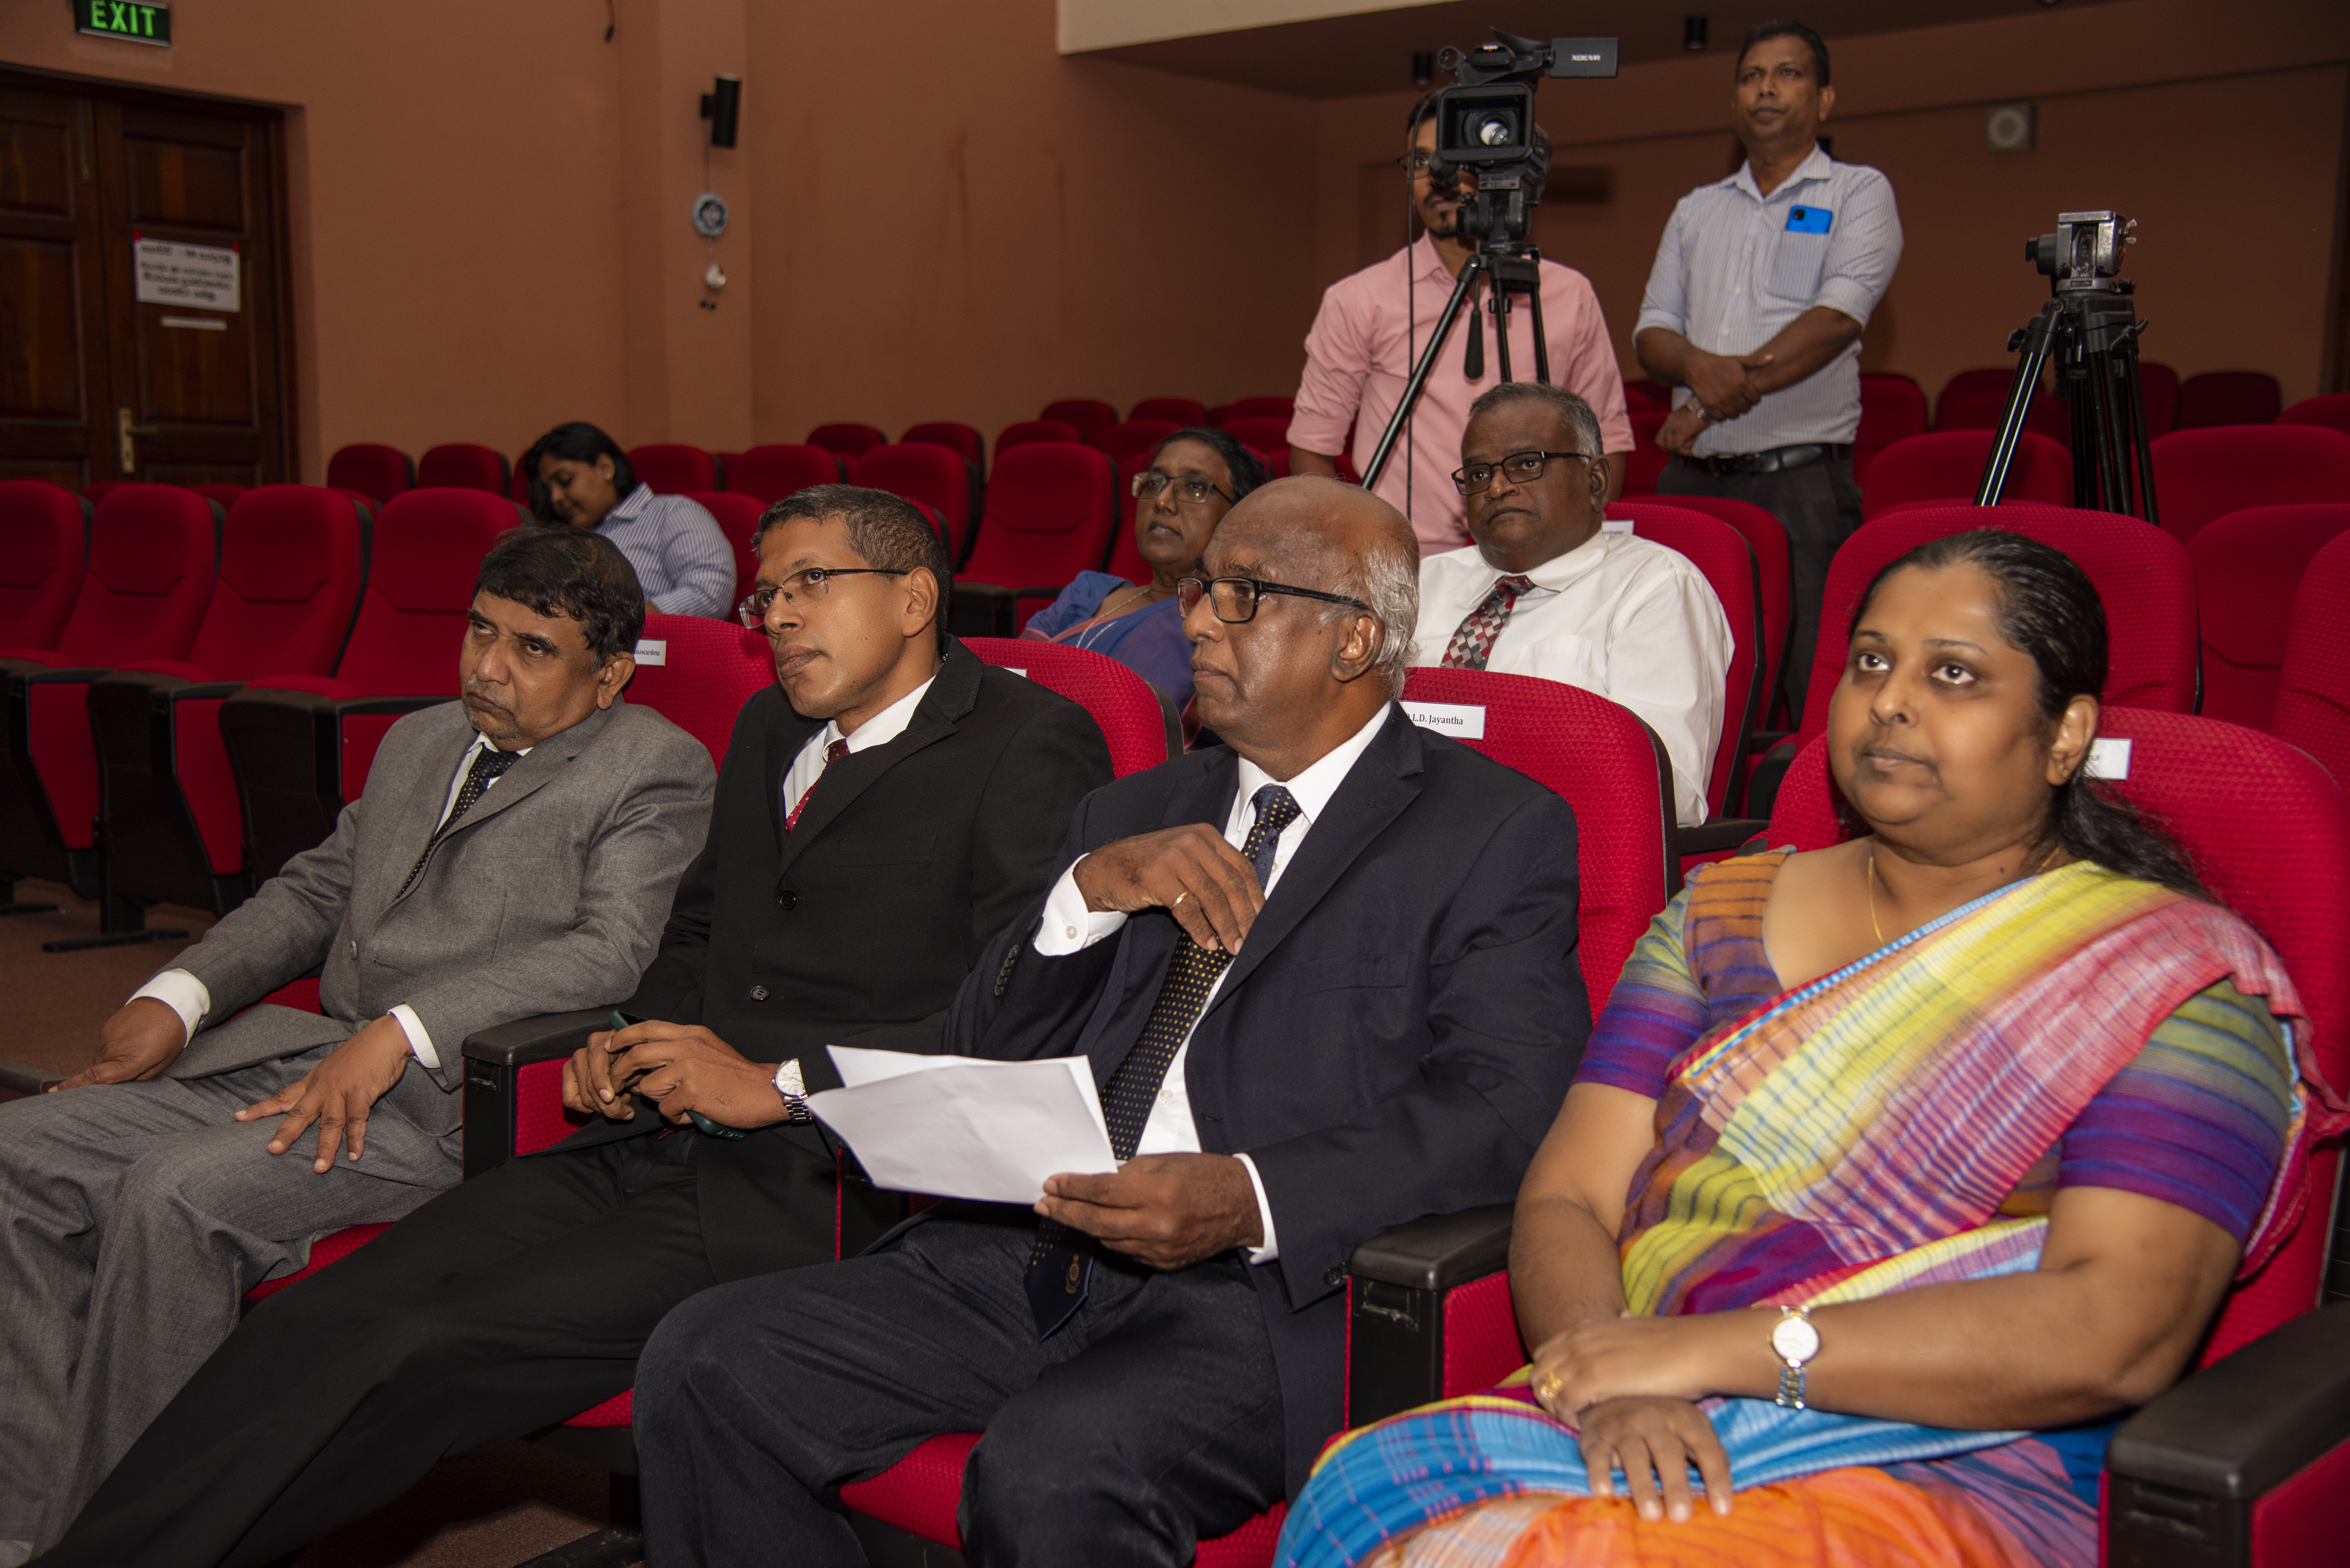 Commemorating 50 Years of Excellence: University of Moratuwa Unveils Special Stamp and First Day Cover